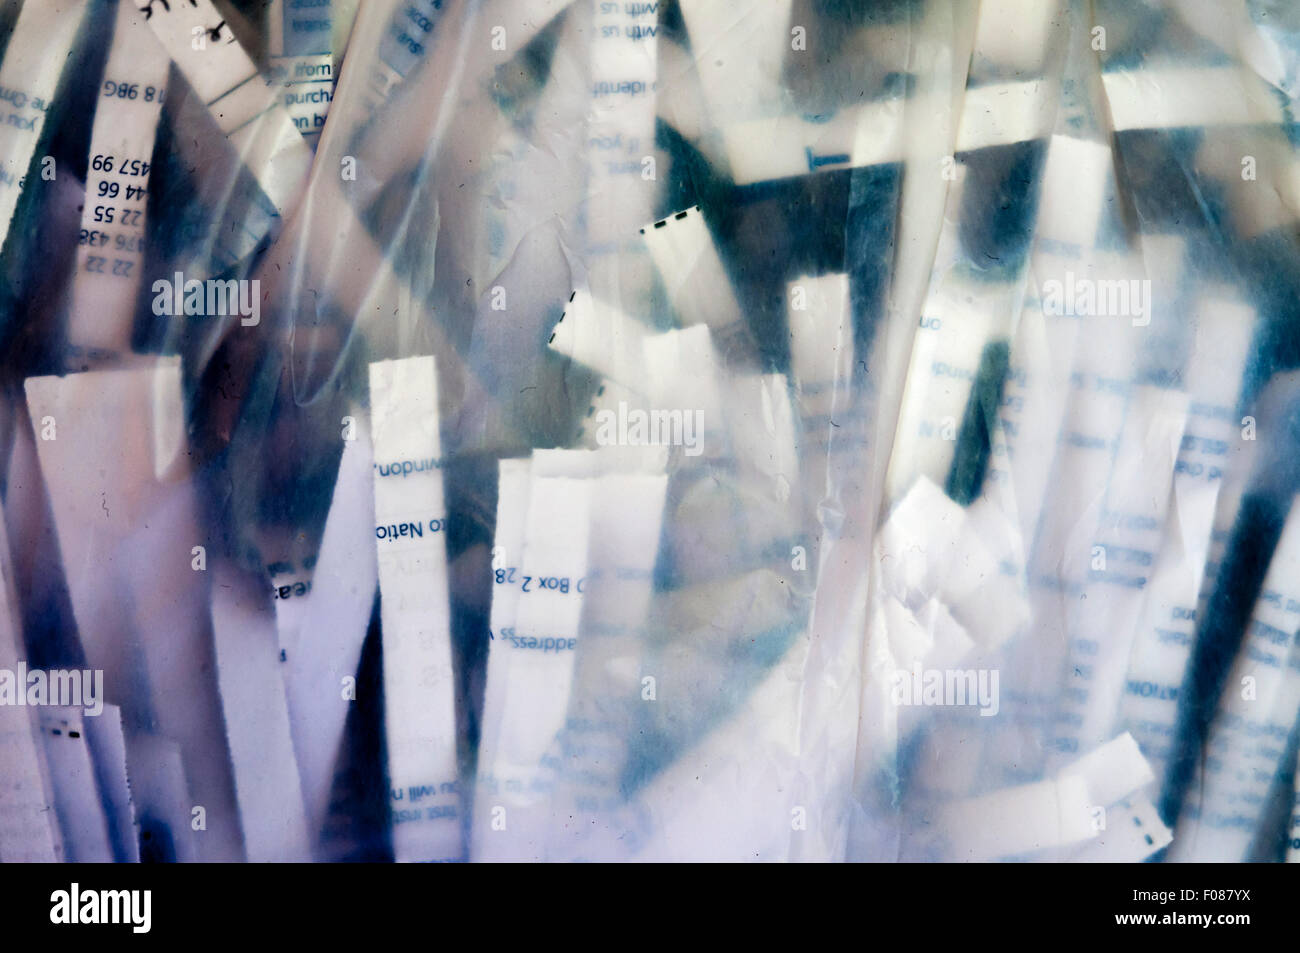 Securely shredded paper seen through the side of a transparent plastic bag. Stock Photo